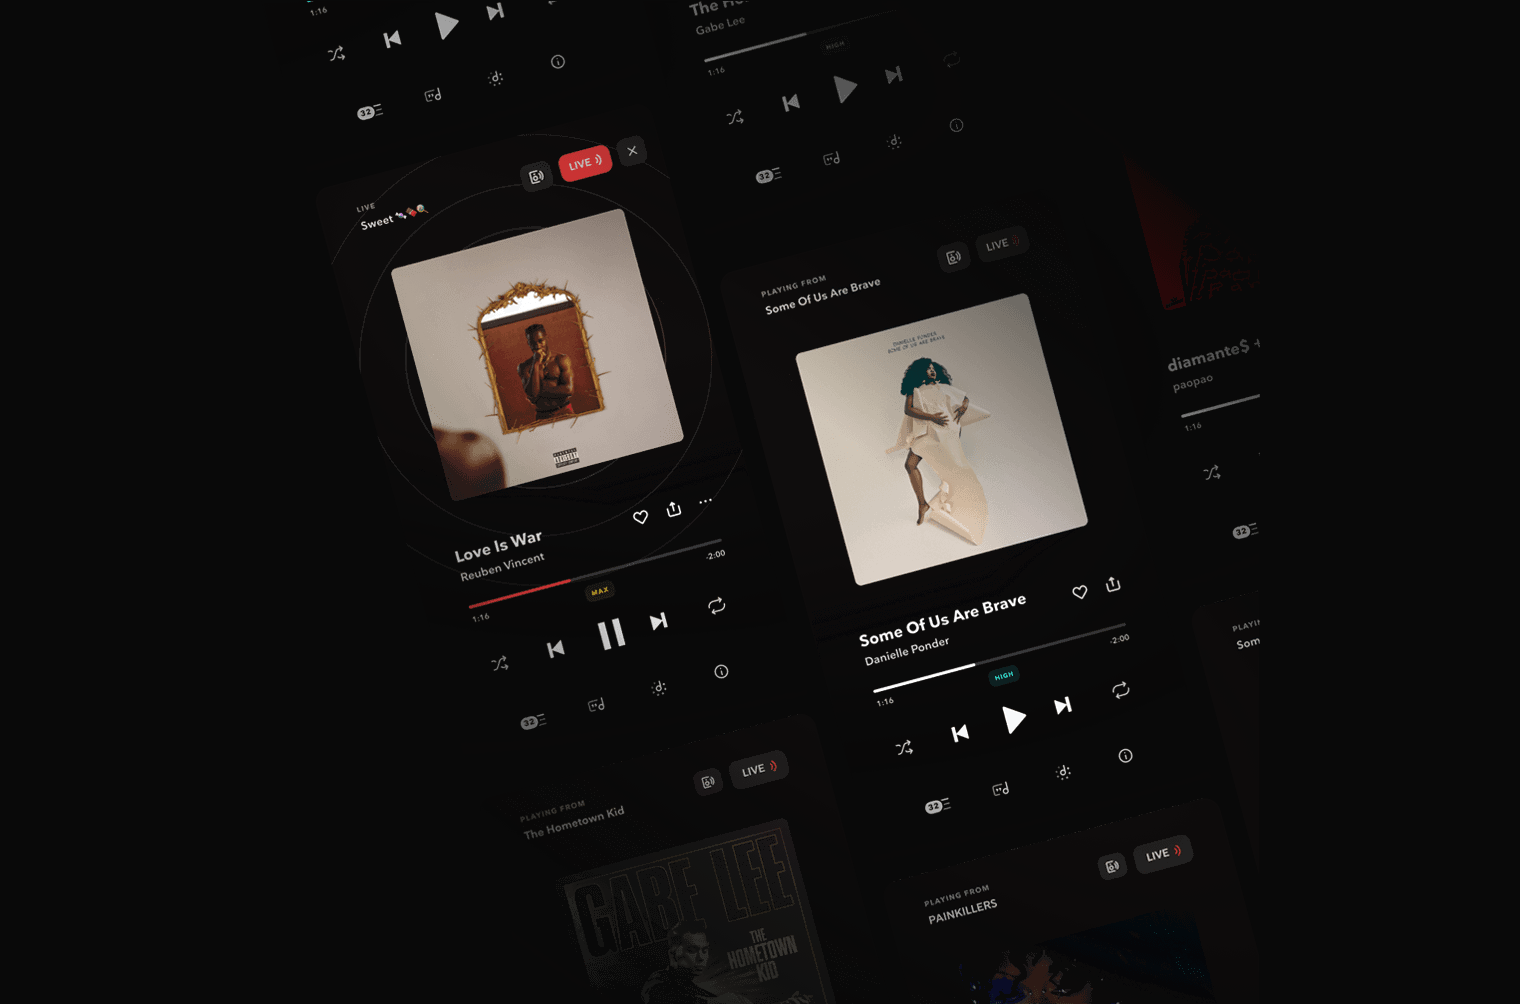 Your TIDAL subscription may be getting much cheaper soon